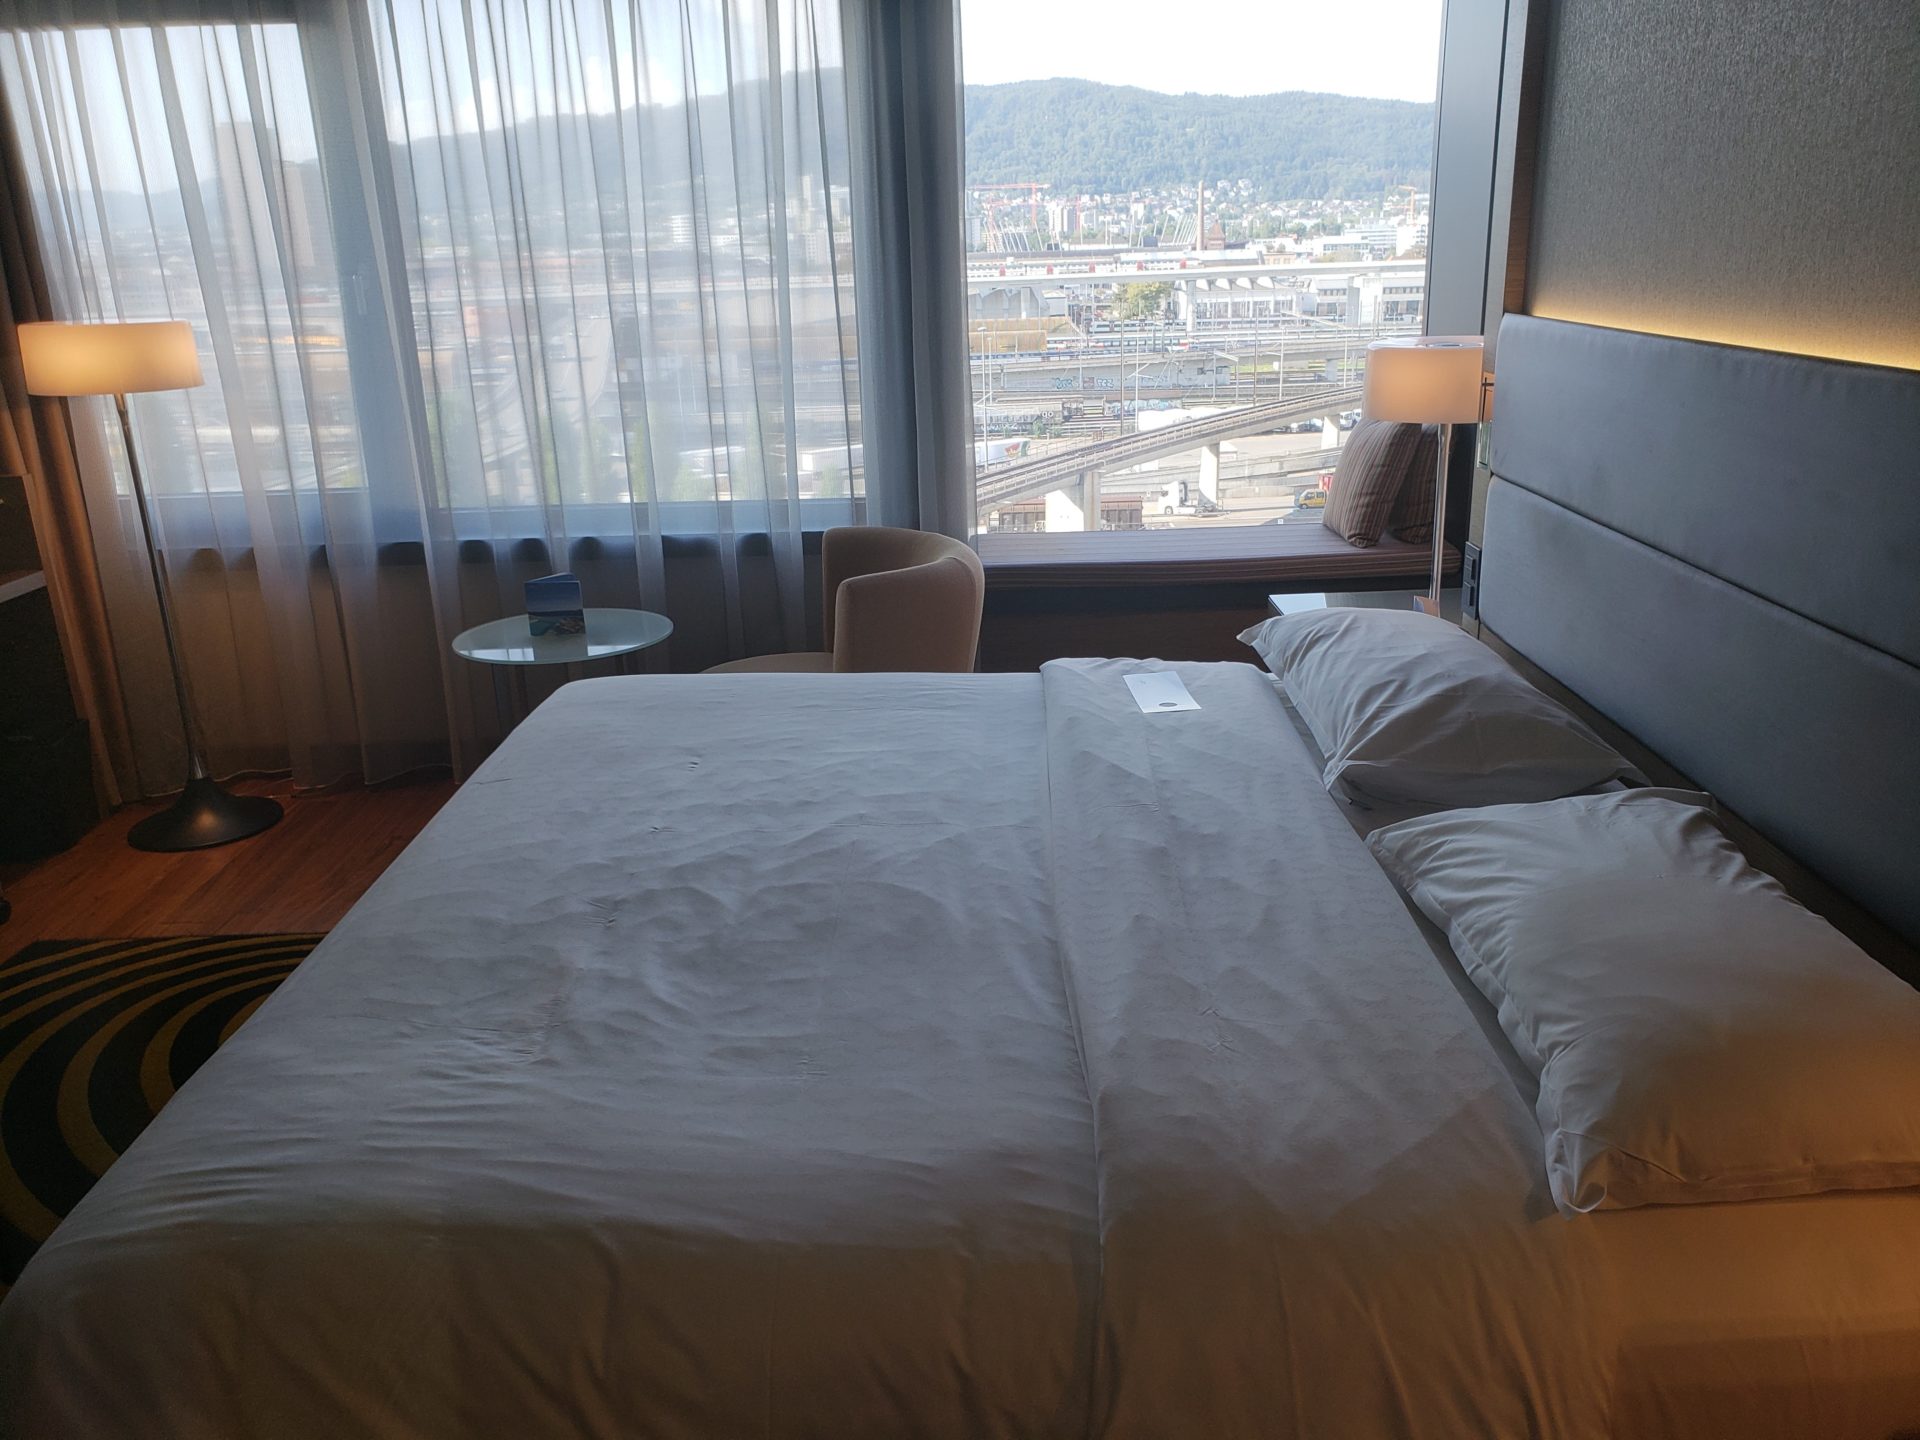 a bed with a window and a city view